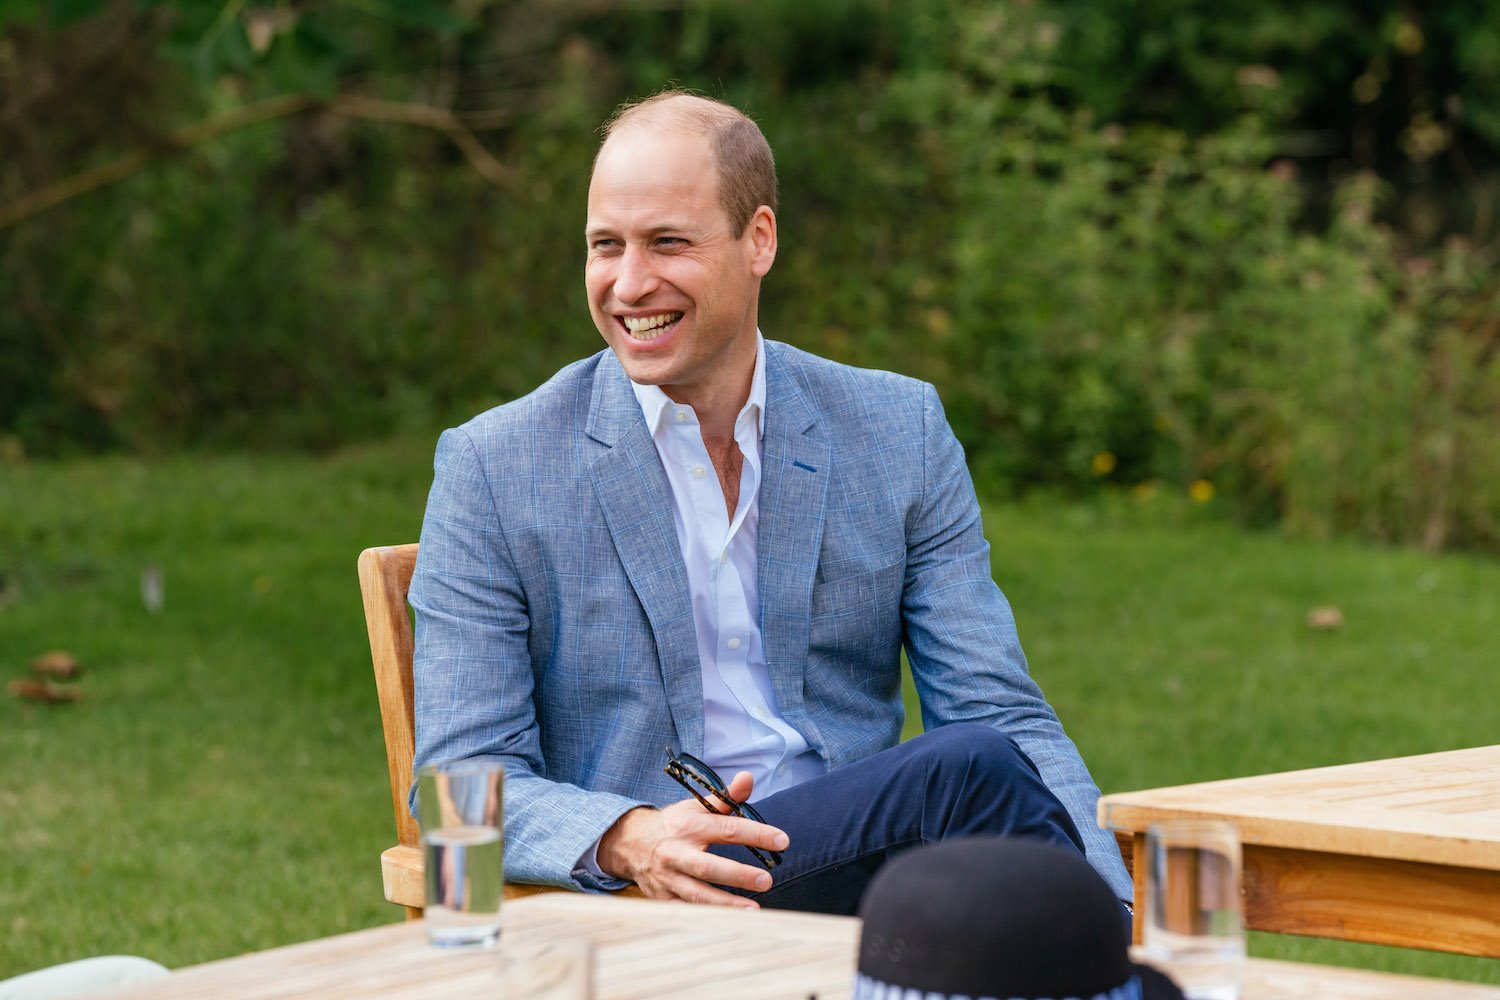 The Internet Is Thirst-Trapping Over This Prince William Photo